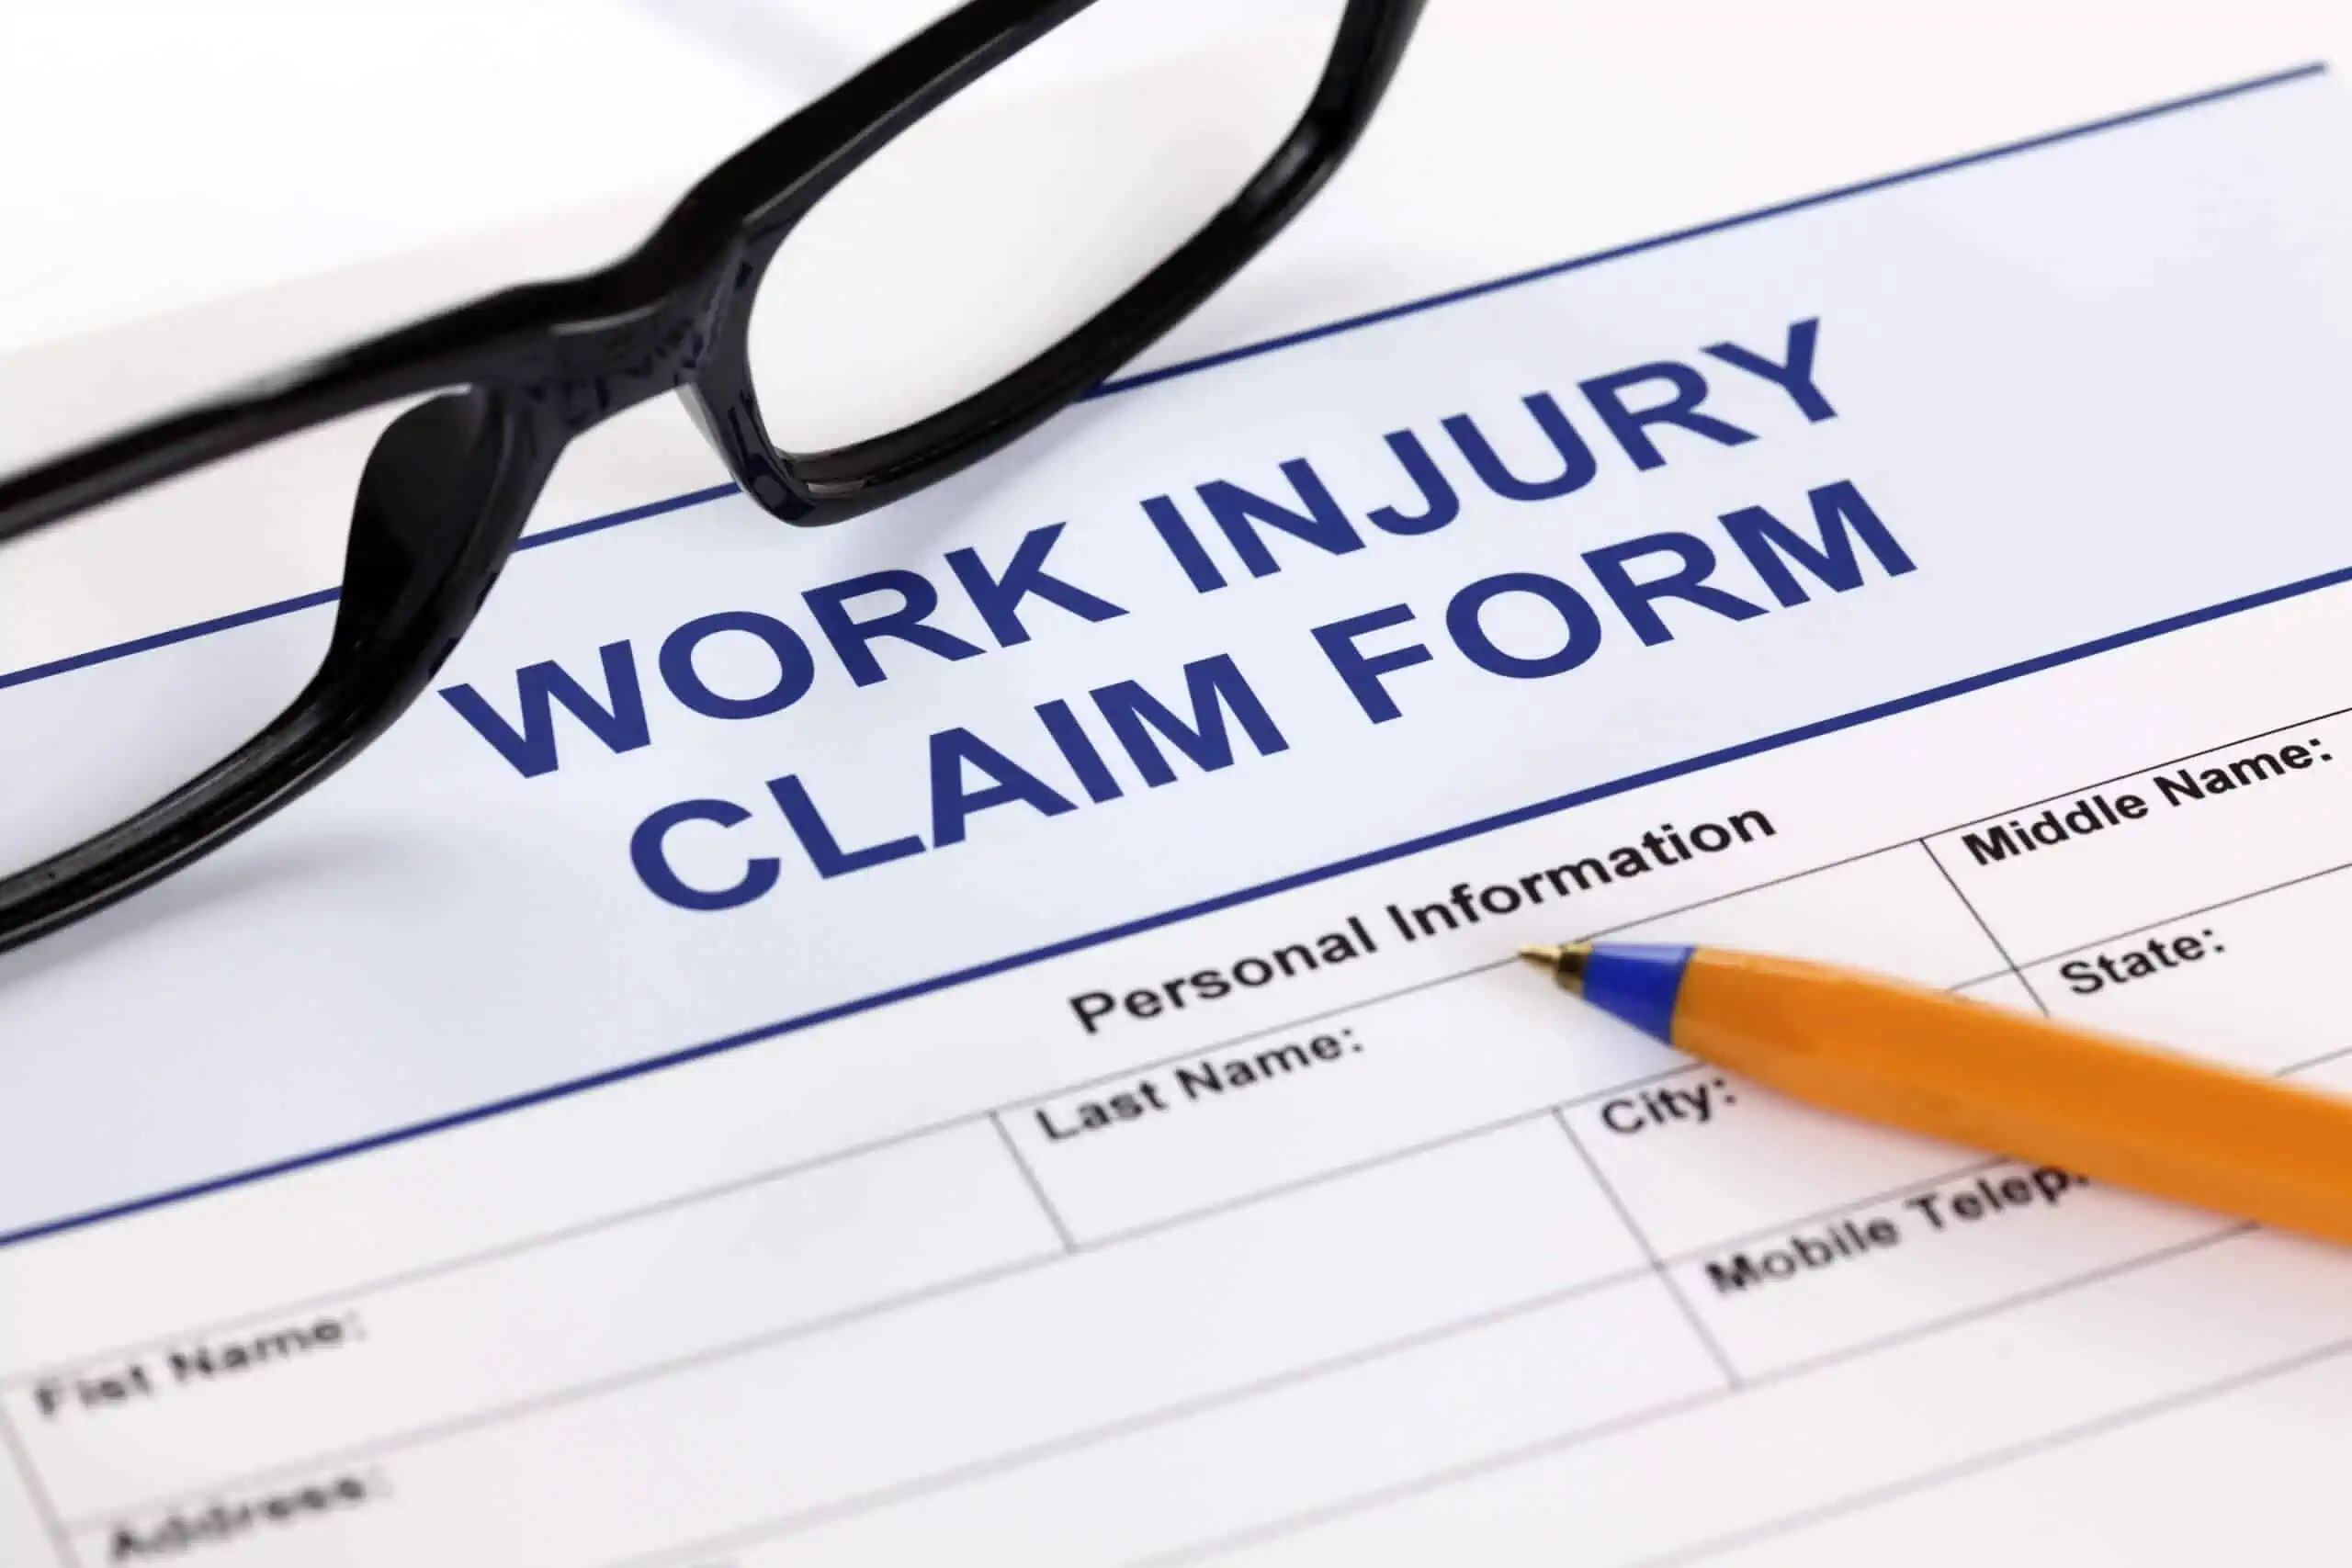 on the job injury attorney west palm beach scaled 1